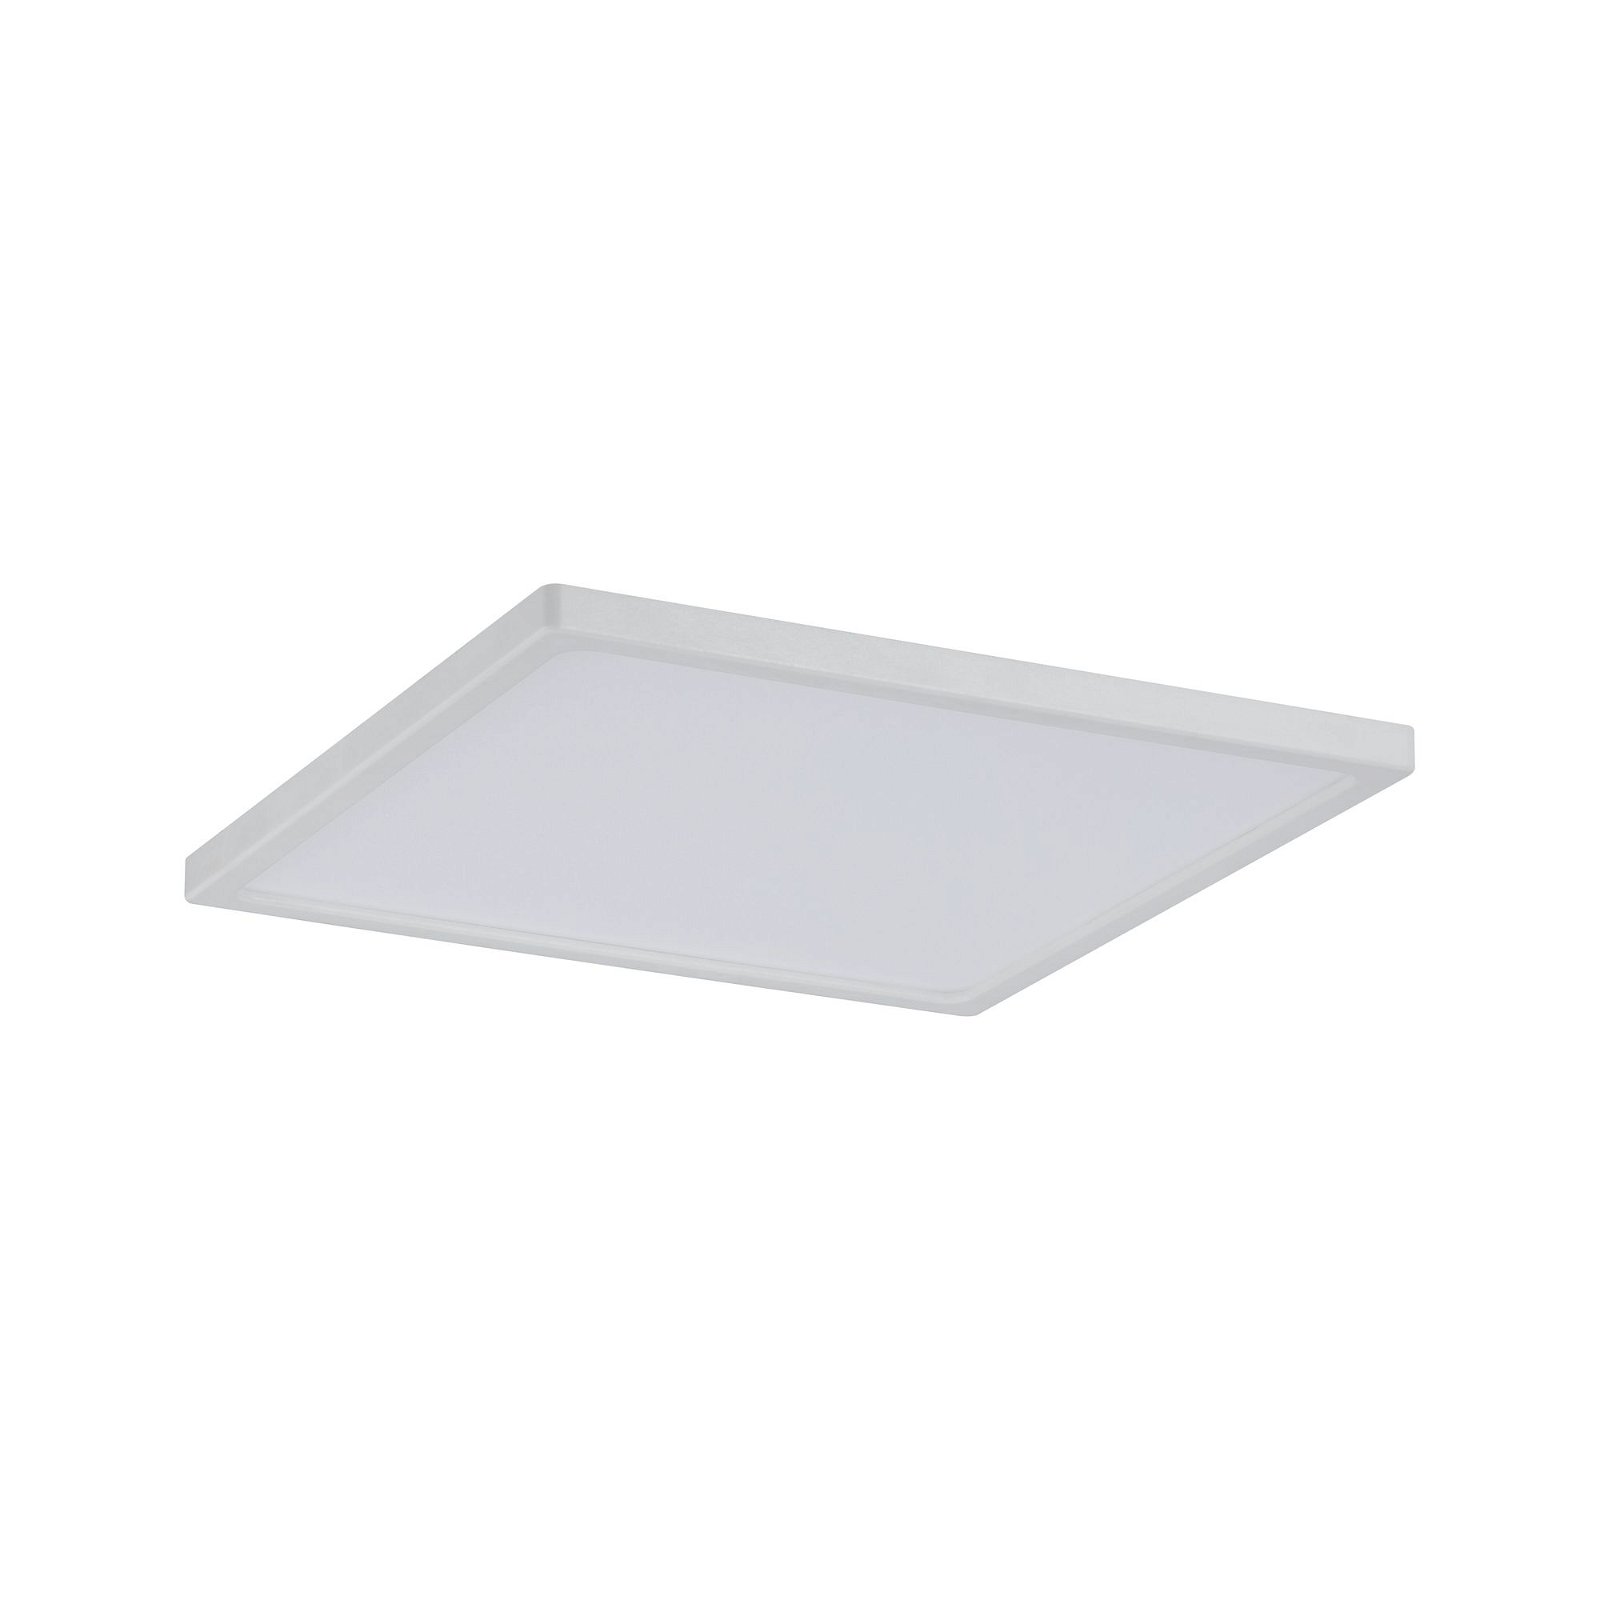 LED Recessed panel Areo IP44 square 180x180mm 12W 930lm 3000K Matt white dimmable